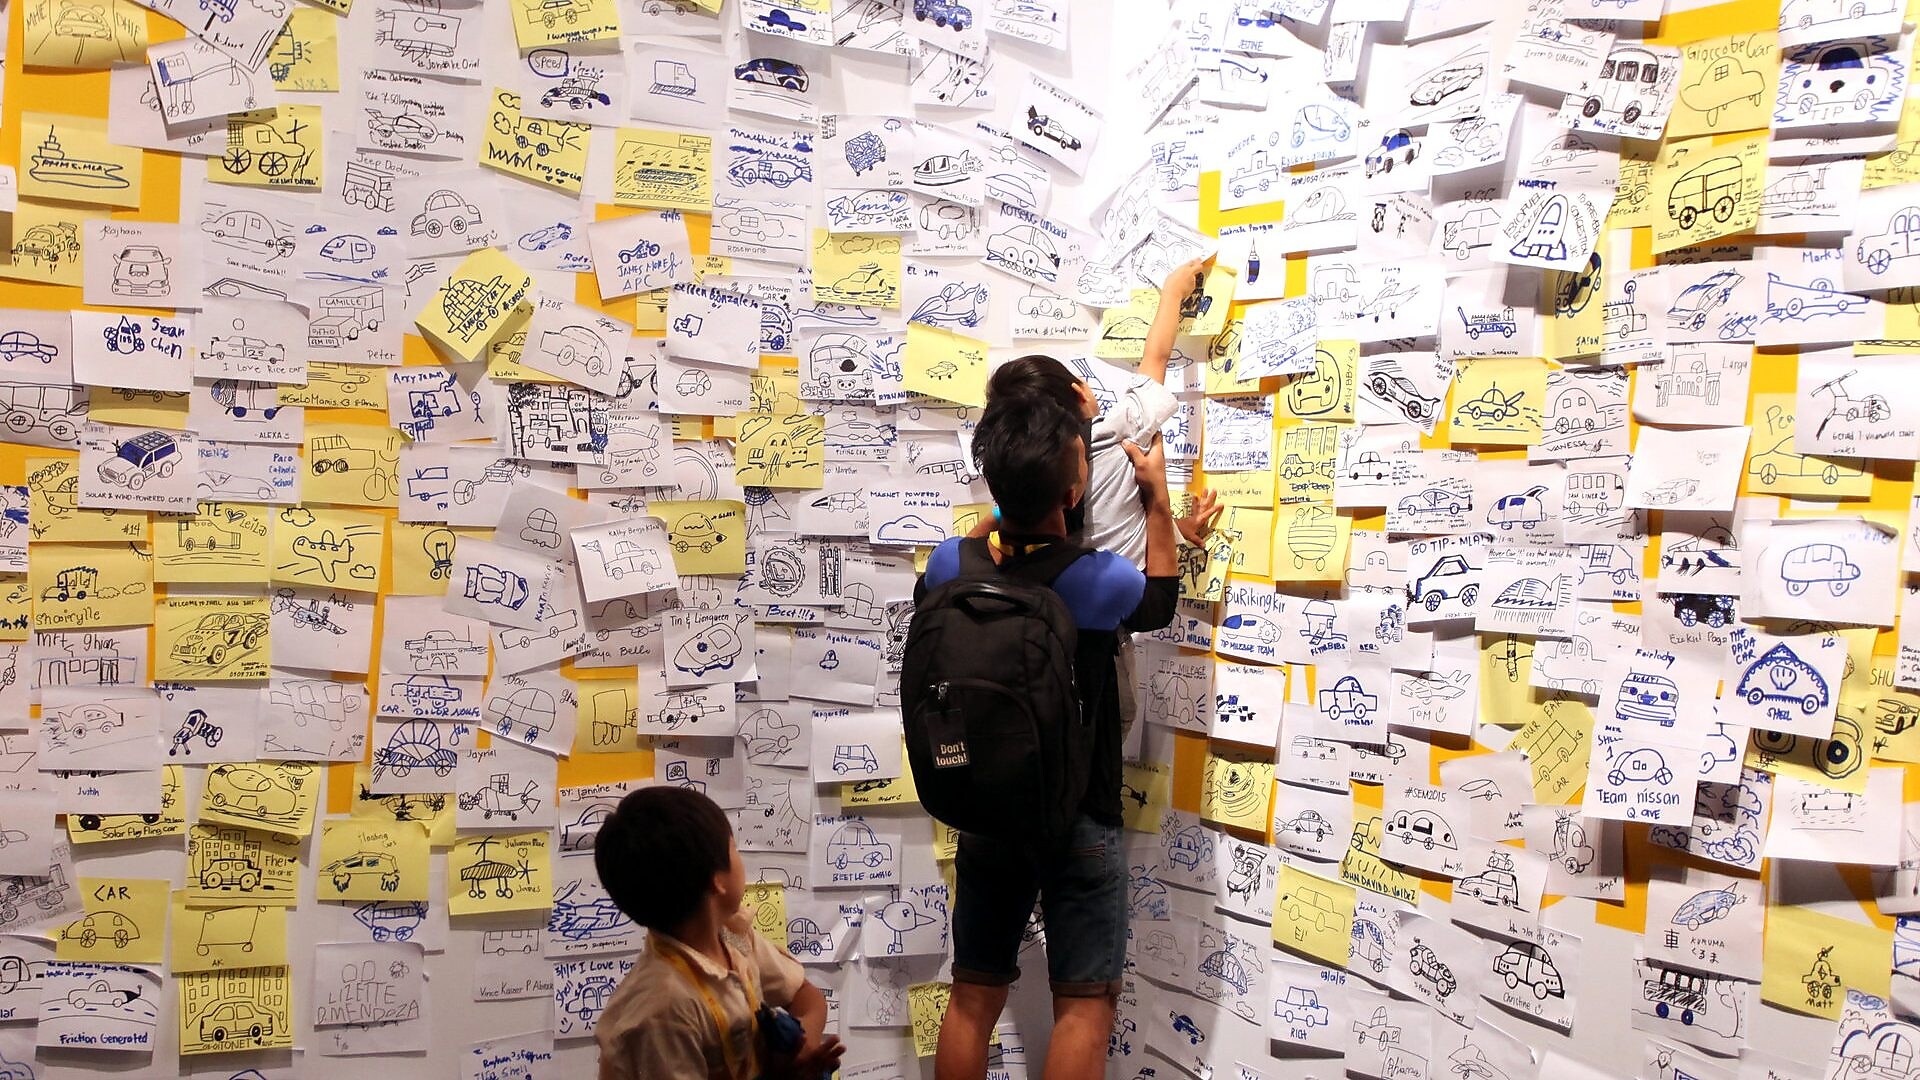 Visitors post 'ideas' on an interactive wall at the 'Experience' during day four of the Shell Eco-marathon 